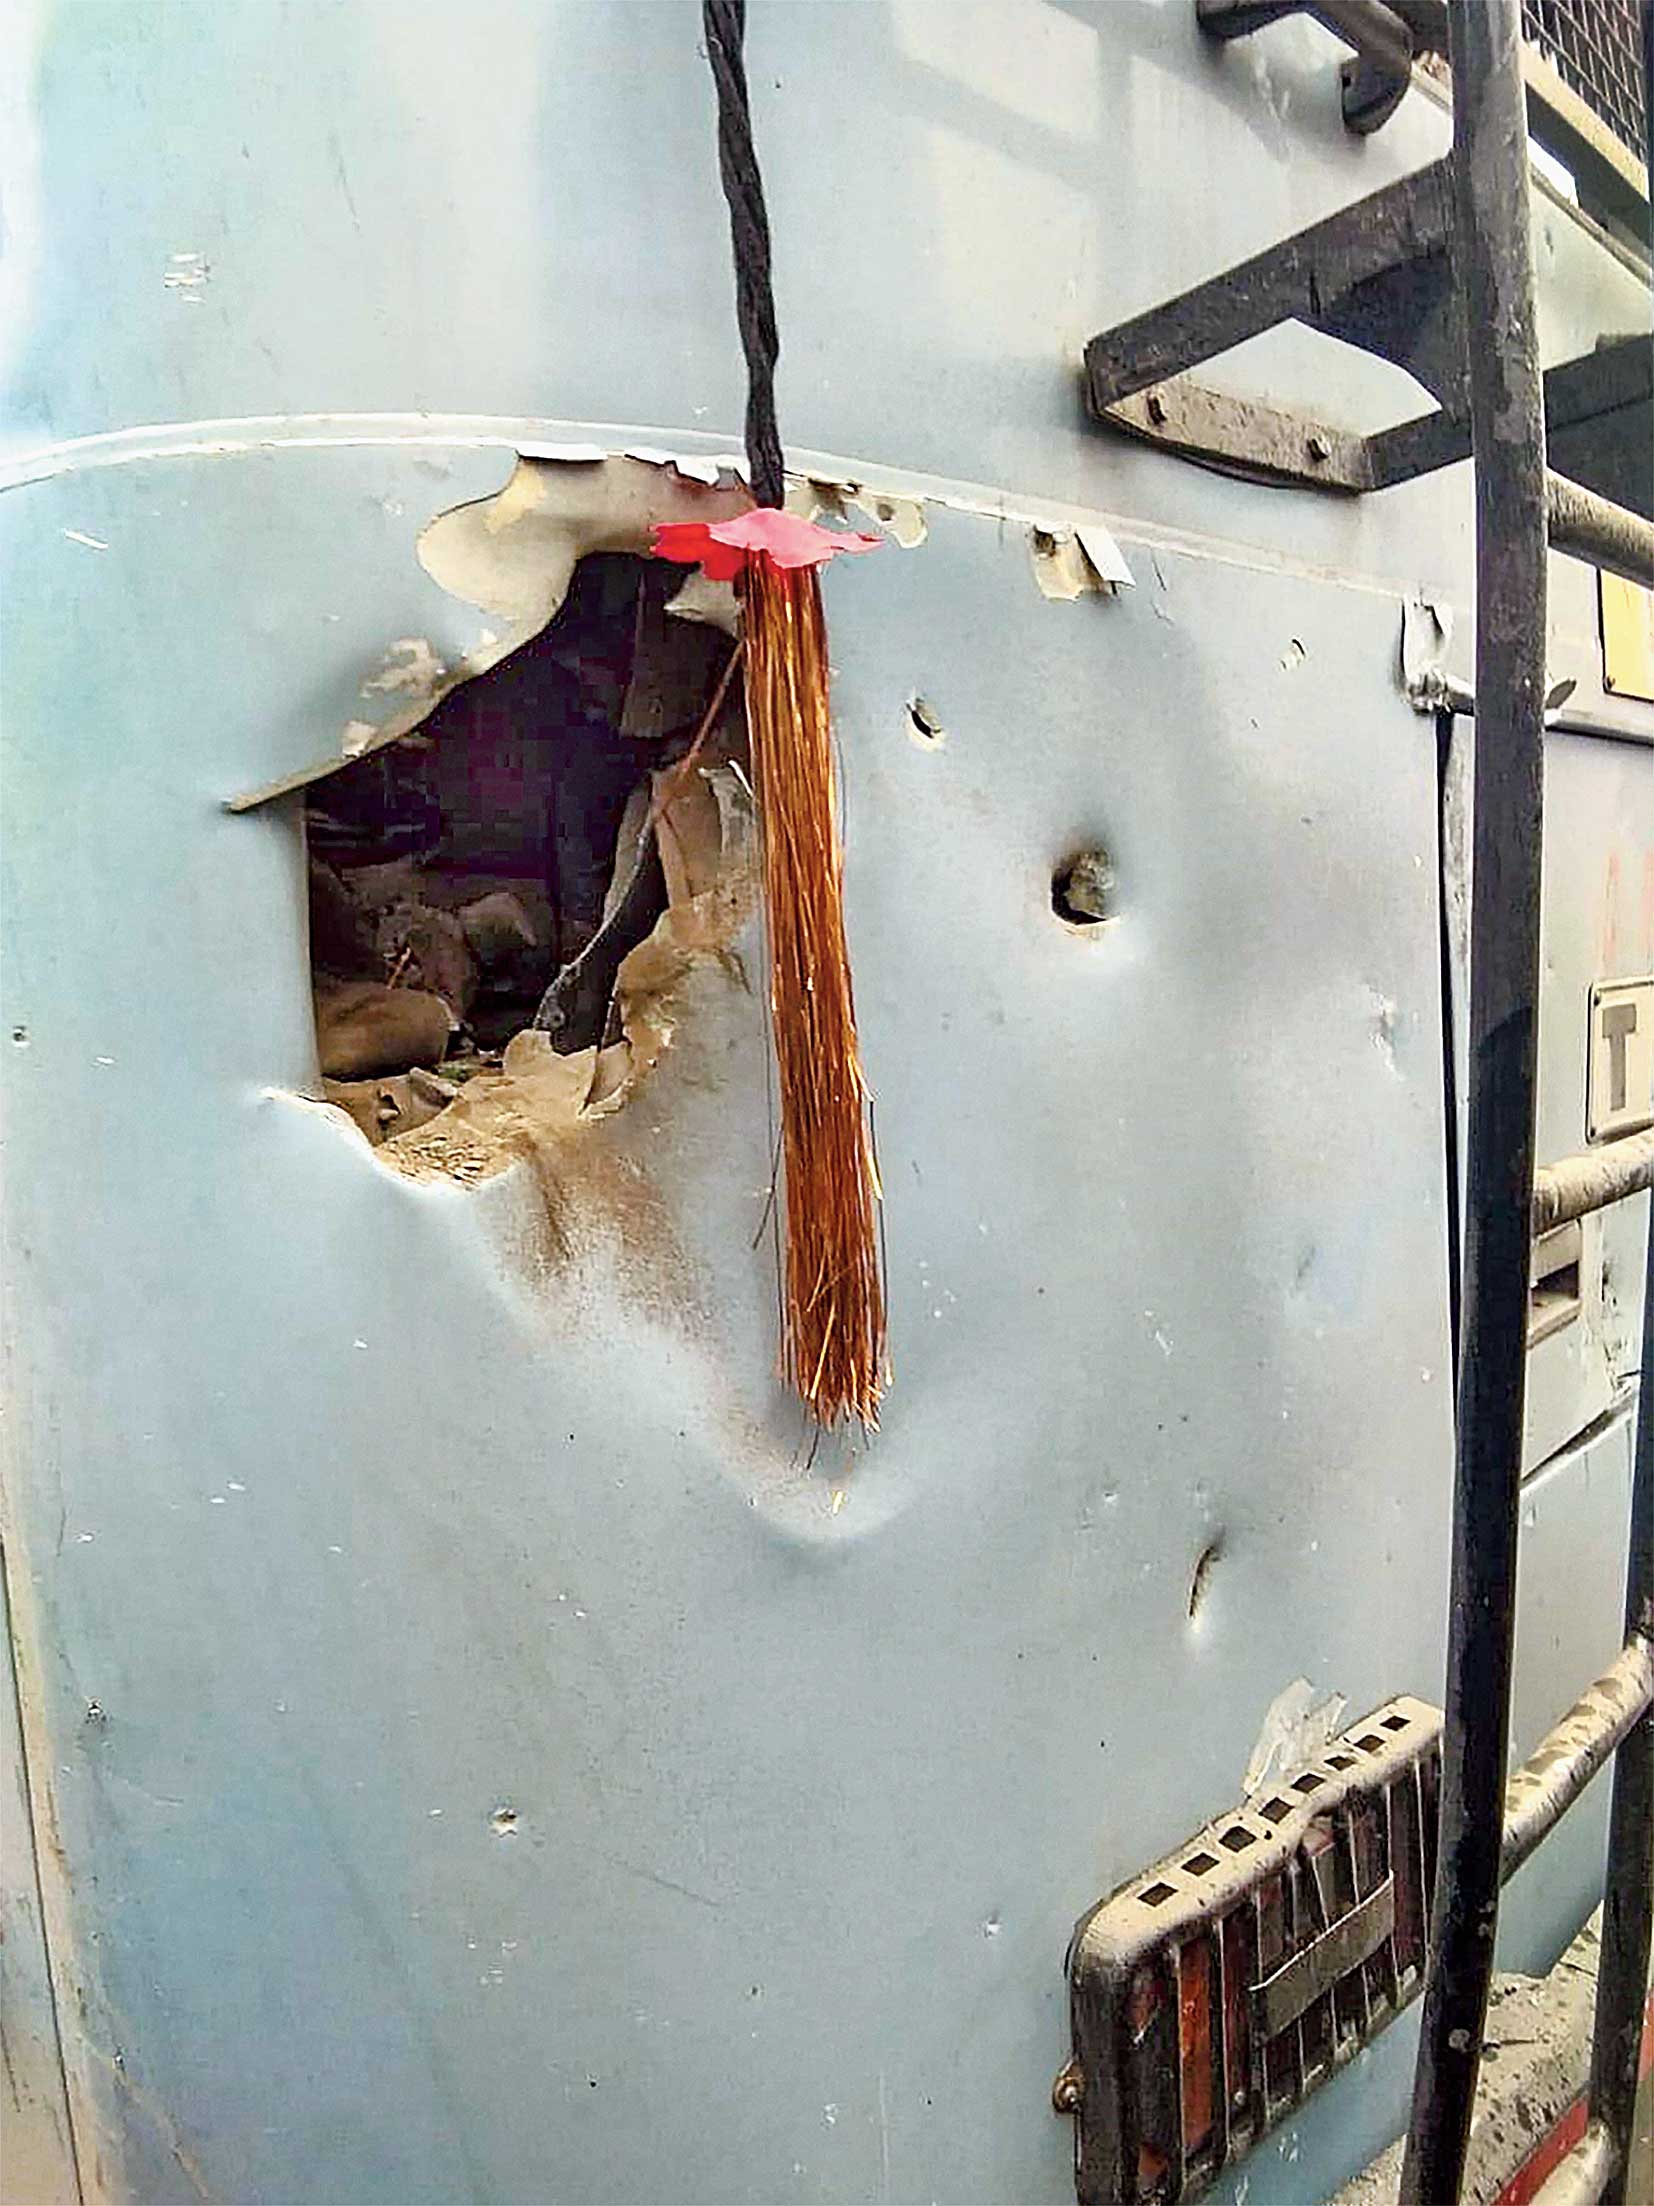 A deep gash on a bus shows the impact of the explosion. 